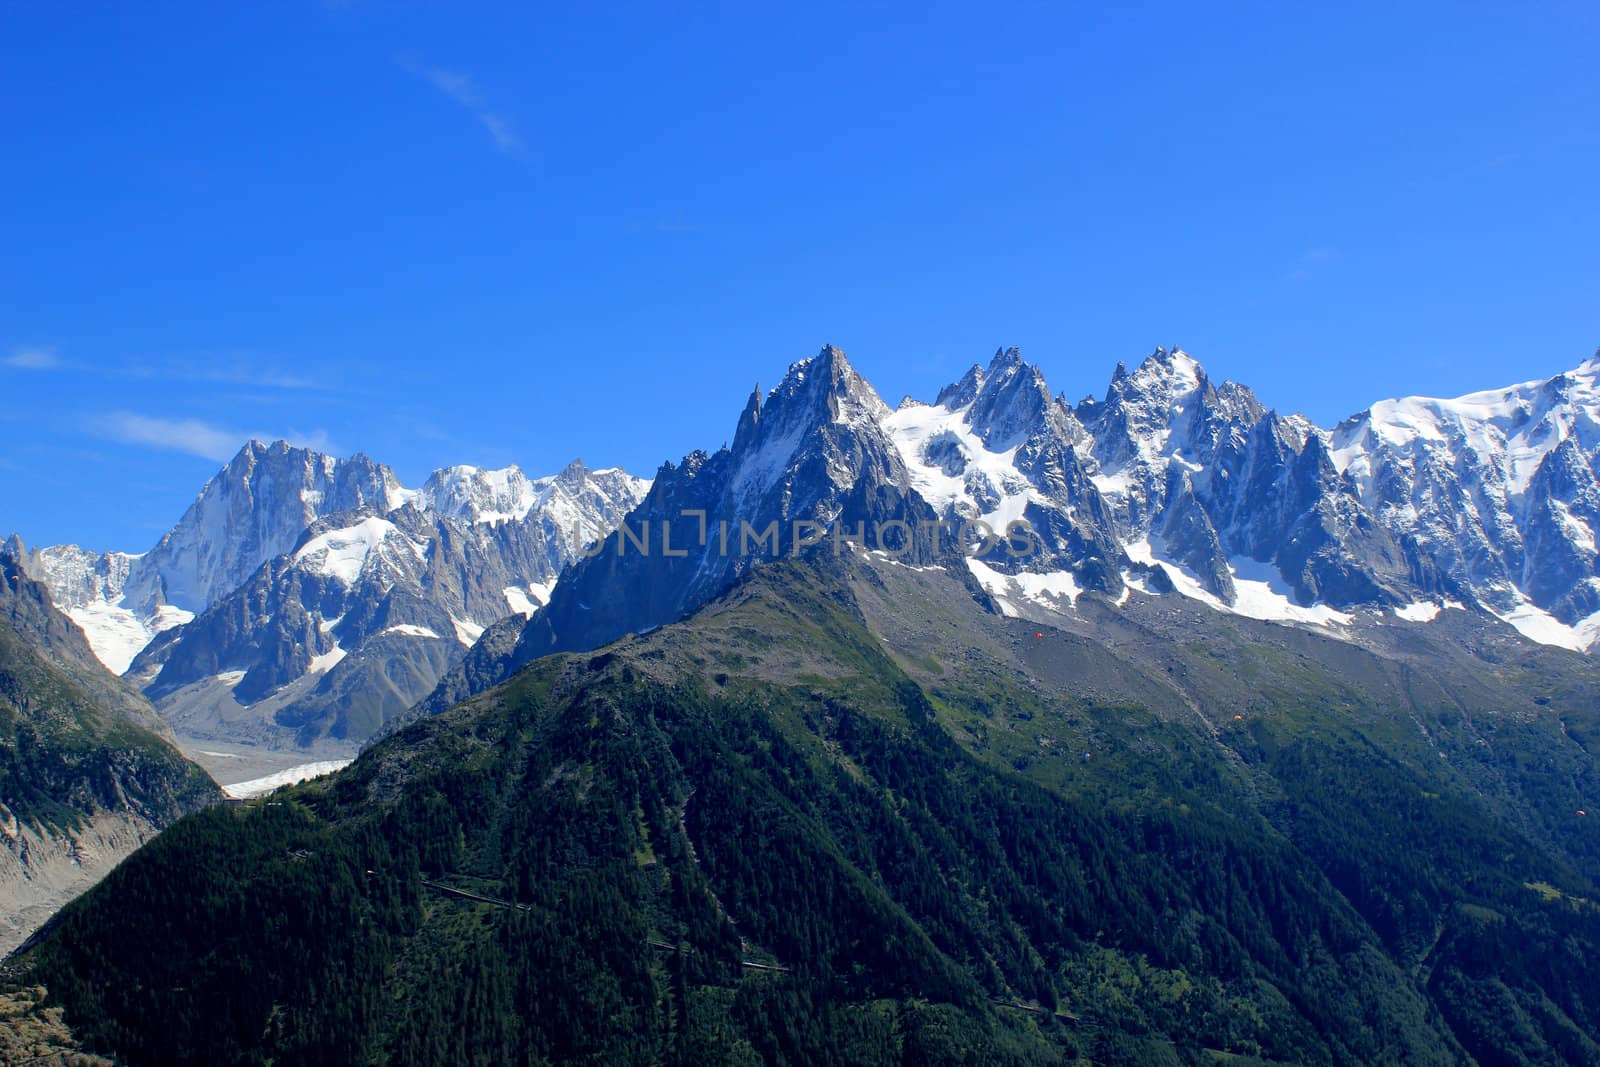 View of the Mont-Blanc massif mountain upon Chamonix, France